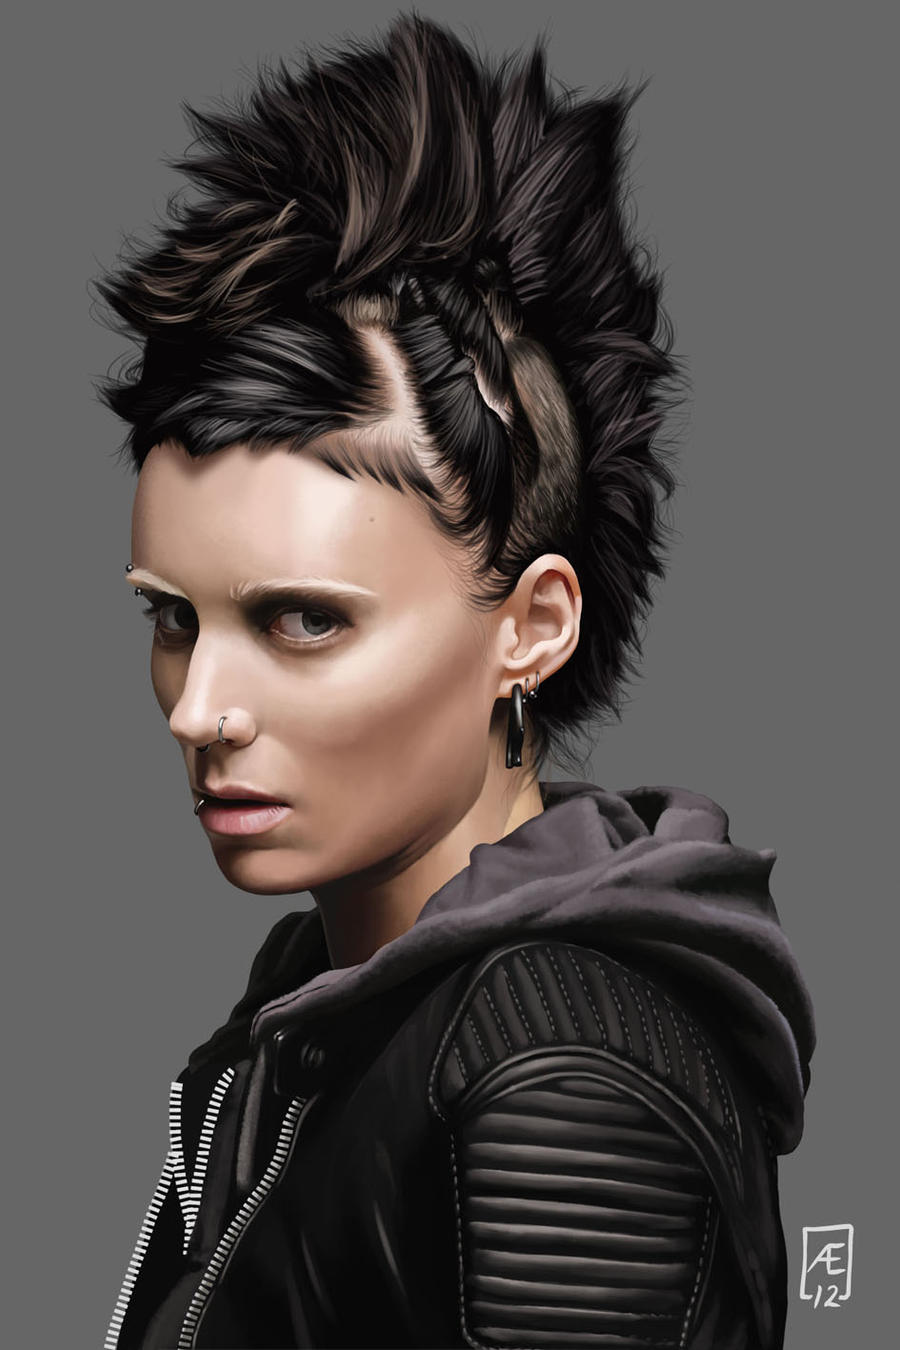 The girl with the dragon tattoo by Aedrian on DeviantArt